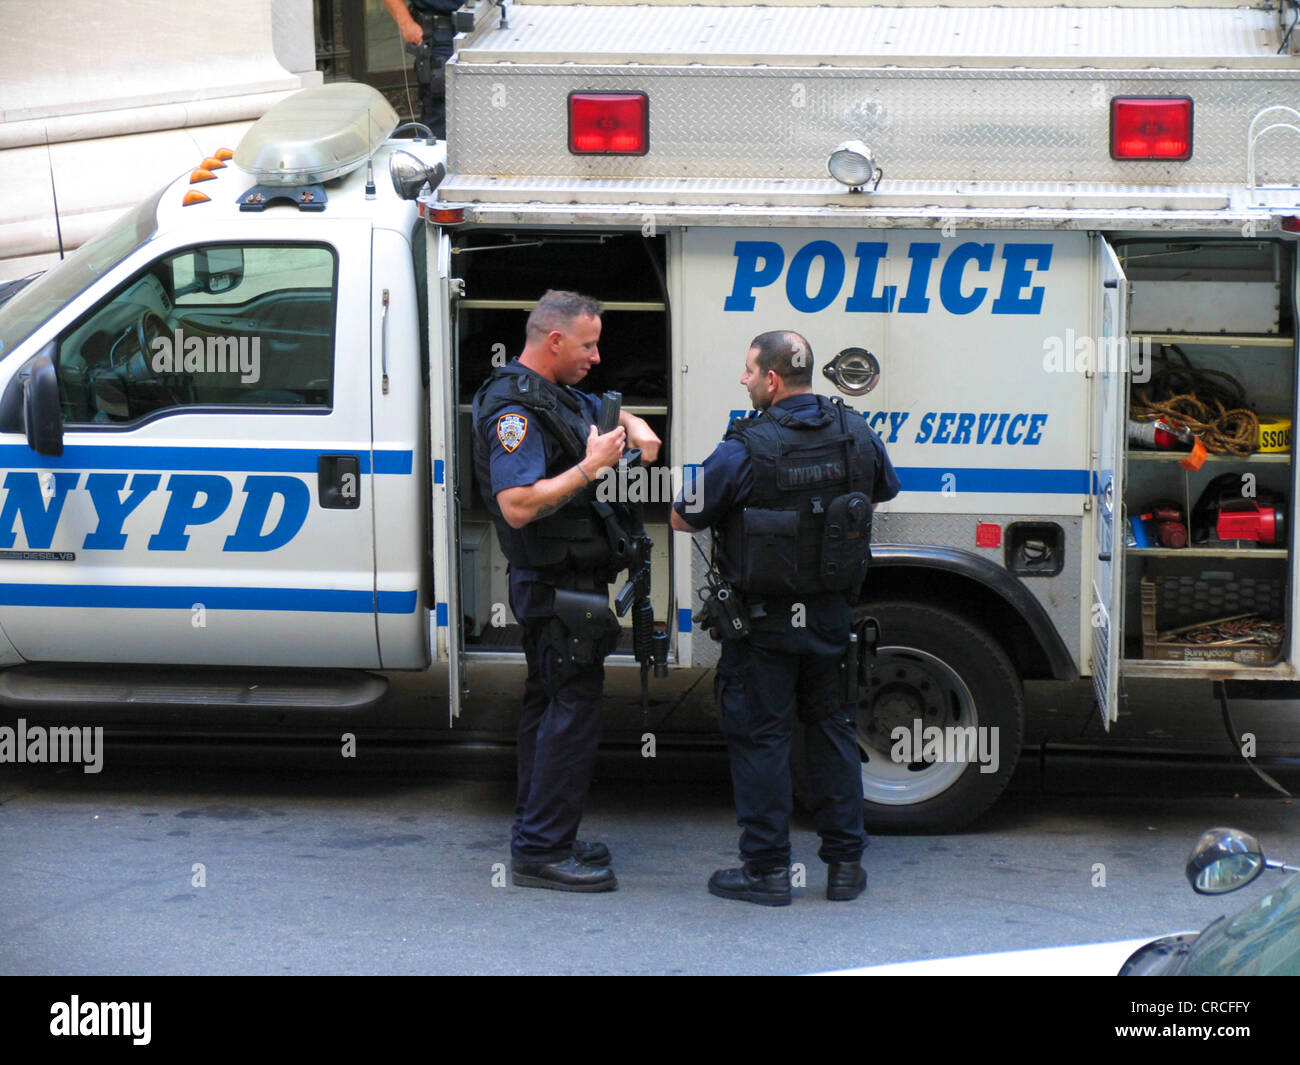 Police car with NYPD writing and heavily armed police officers, USA, New York City, Manhattan Stock Photo